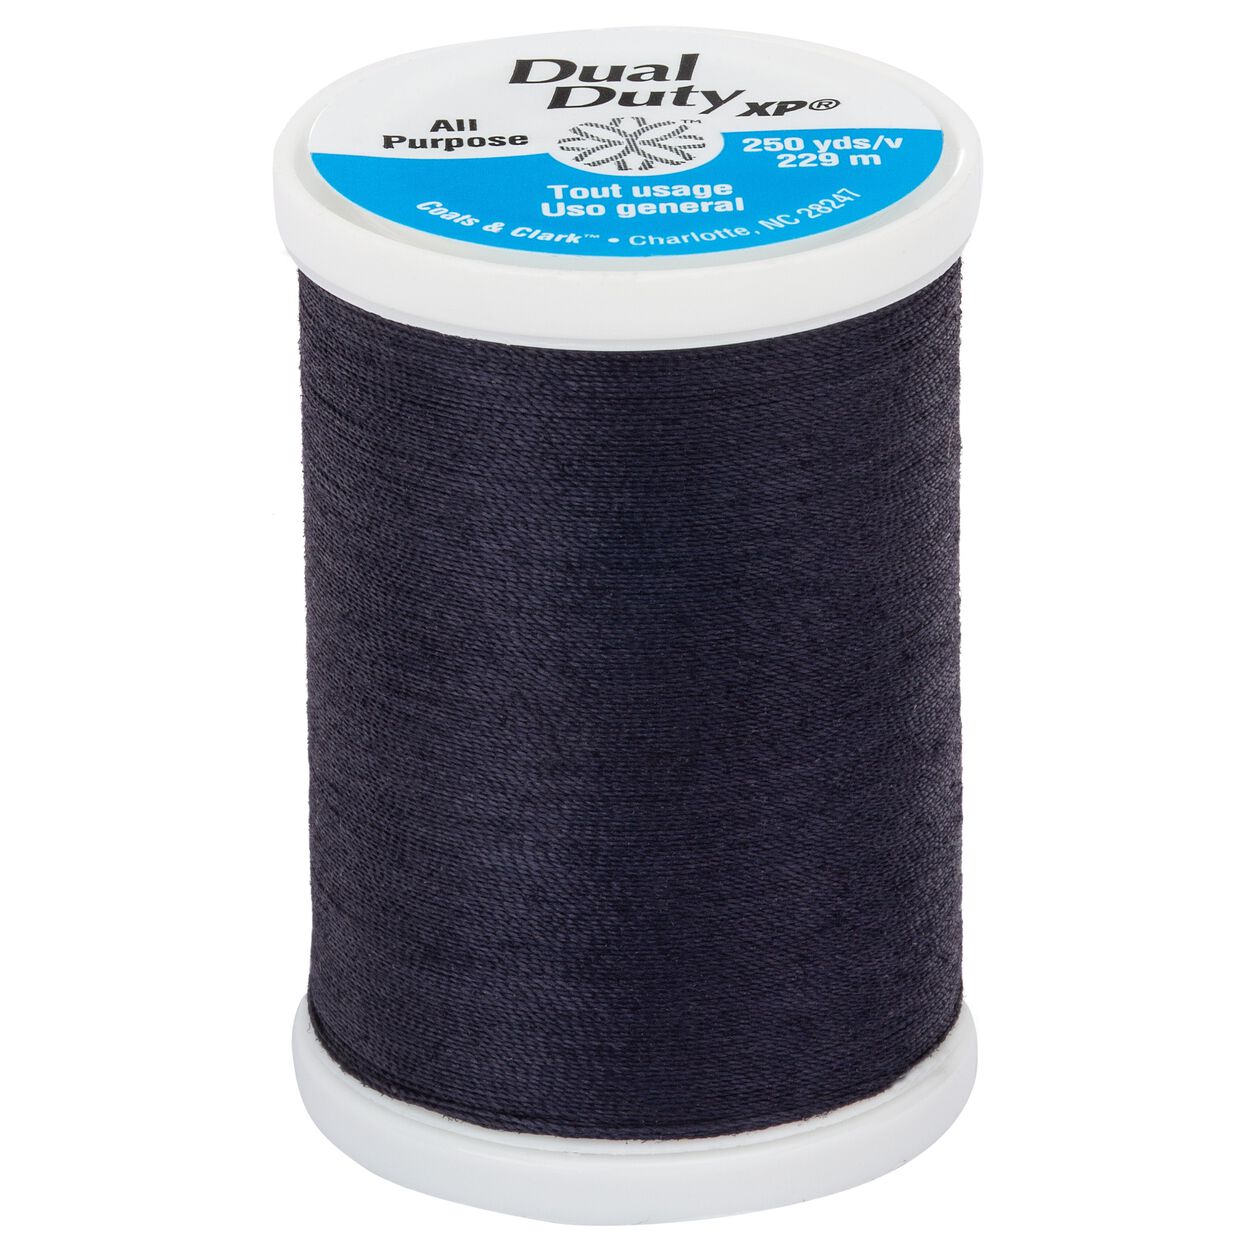 Dual Duty XP,  All Purpose Threads,  250 yards by Coats --- Part 1  ---